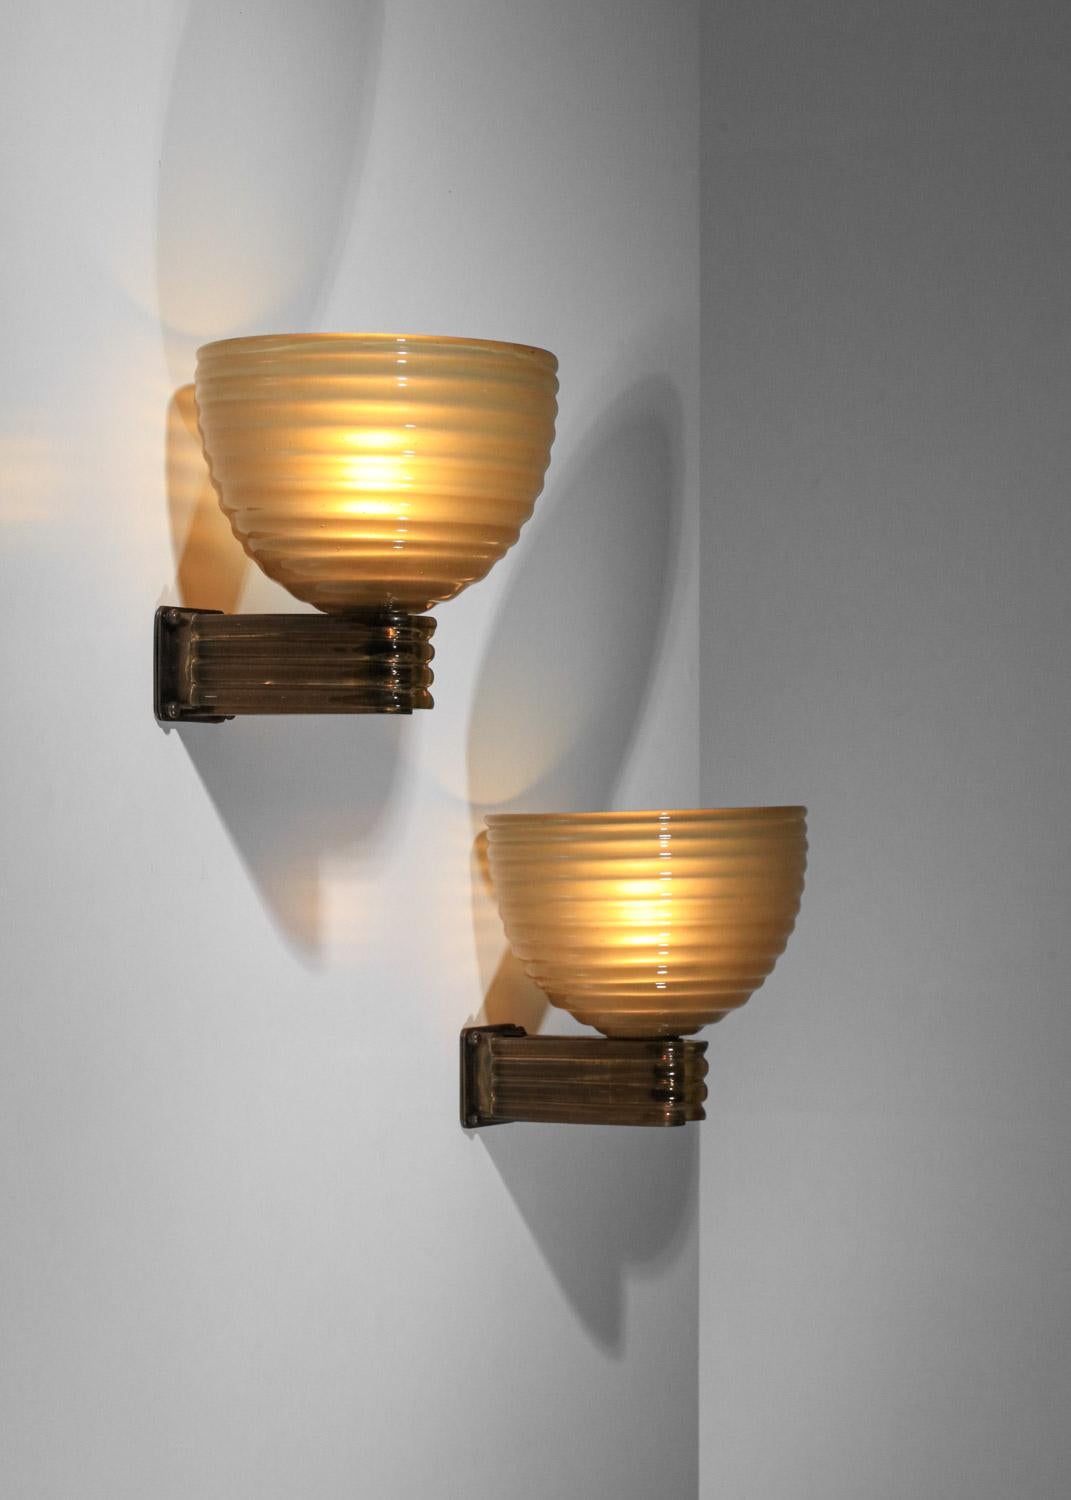 Large pair of Italian sconces by designer Tomaso Buzzi from the 60s. Structure and shade in thick Muranno glass in gold / yellow hues. Very fine vintage condition, with slight traces of age and use. Original electrical system, use E27 LED bulbs